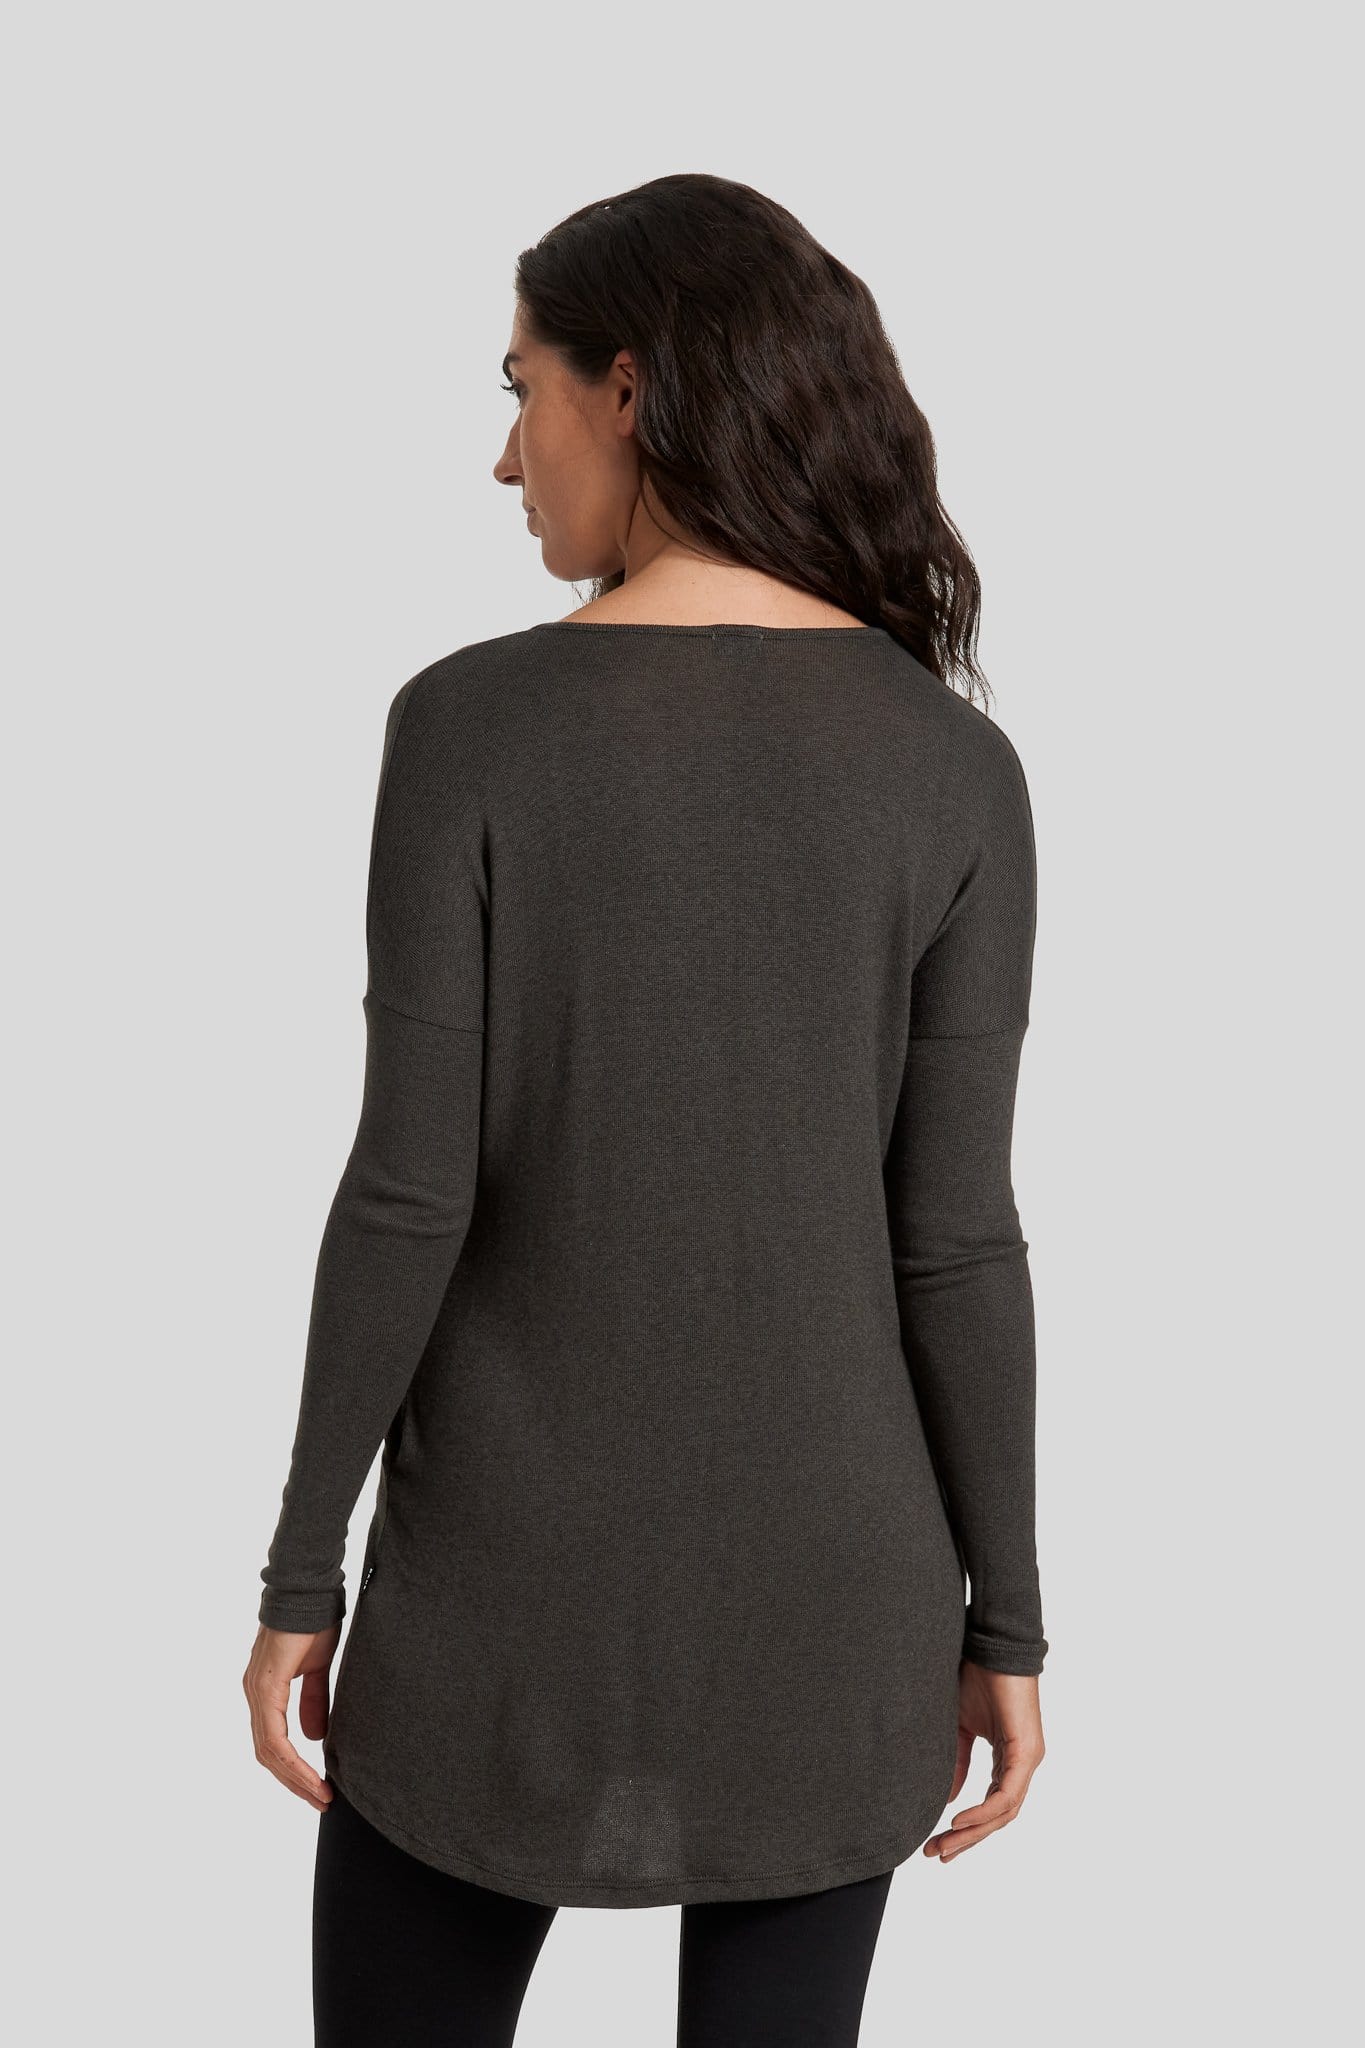 The back of a woman wearing a green sweater.